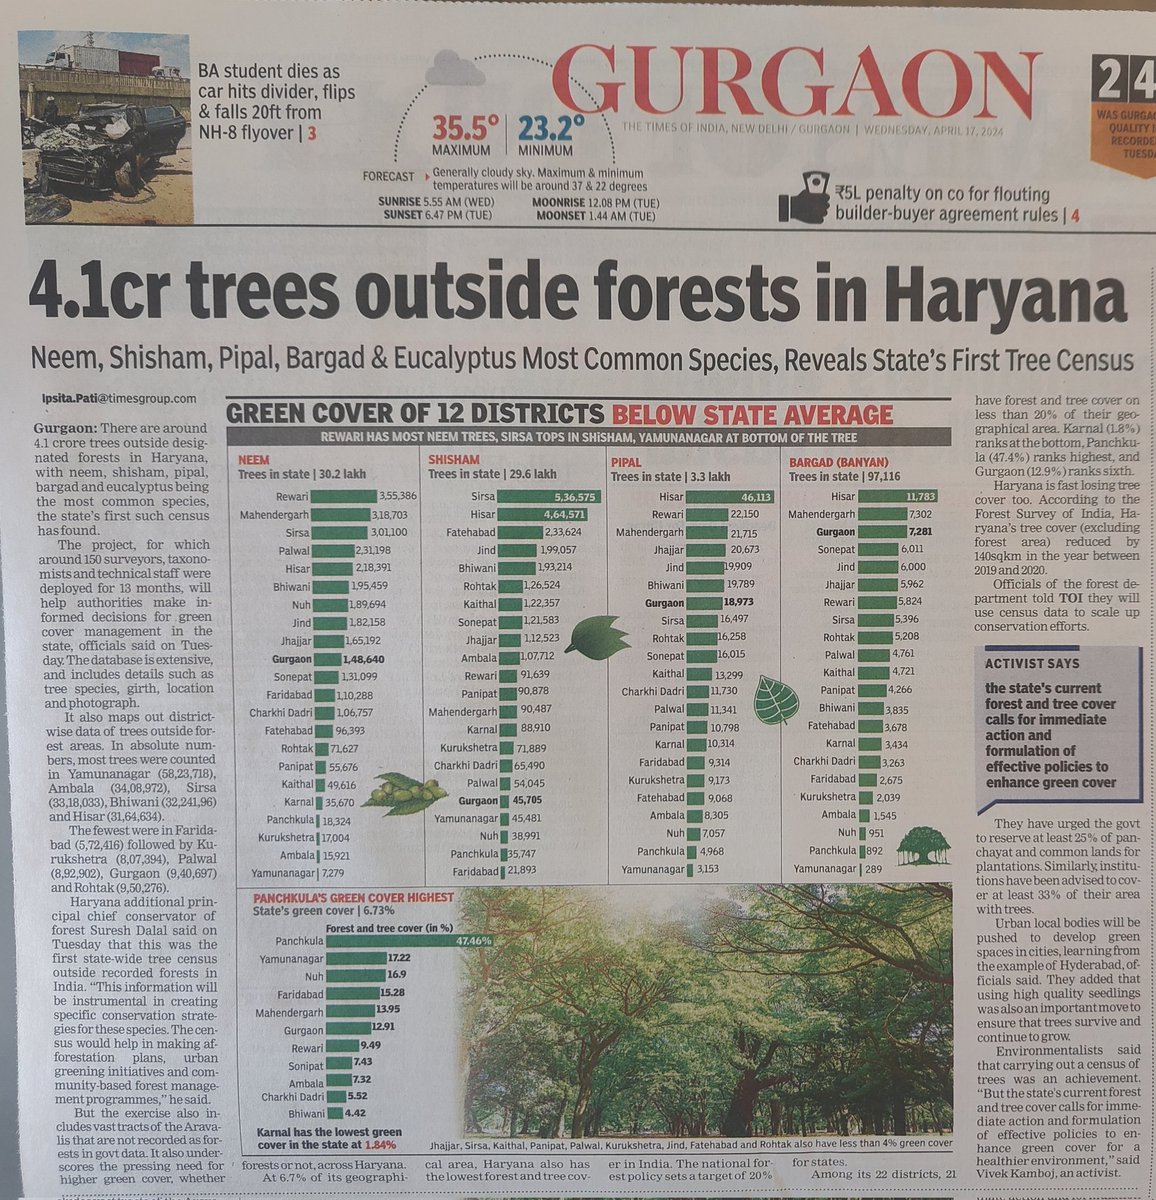 Haryana completes first tree census: Green cover at 6.73%, 4.1 cr trees outside of forest areas @moefcc @SPYadavIFS @pargaien @AP_Climate @debadityo @lifeindia2016 @rahuulchoudhary @SunilHarsana Read the full story here shorturl.at/moMQ5